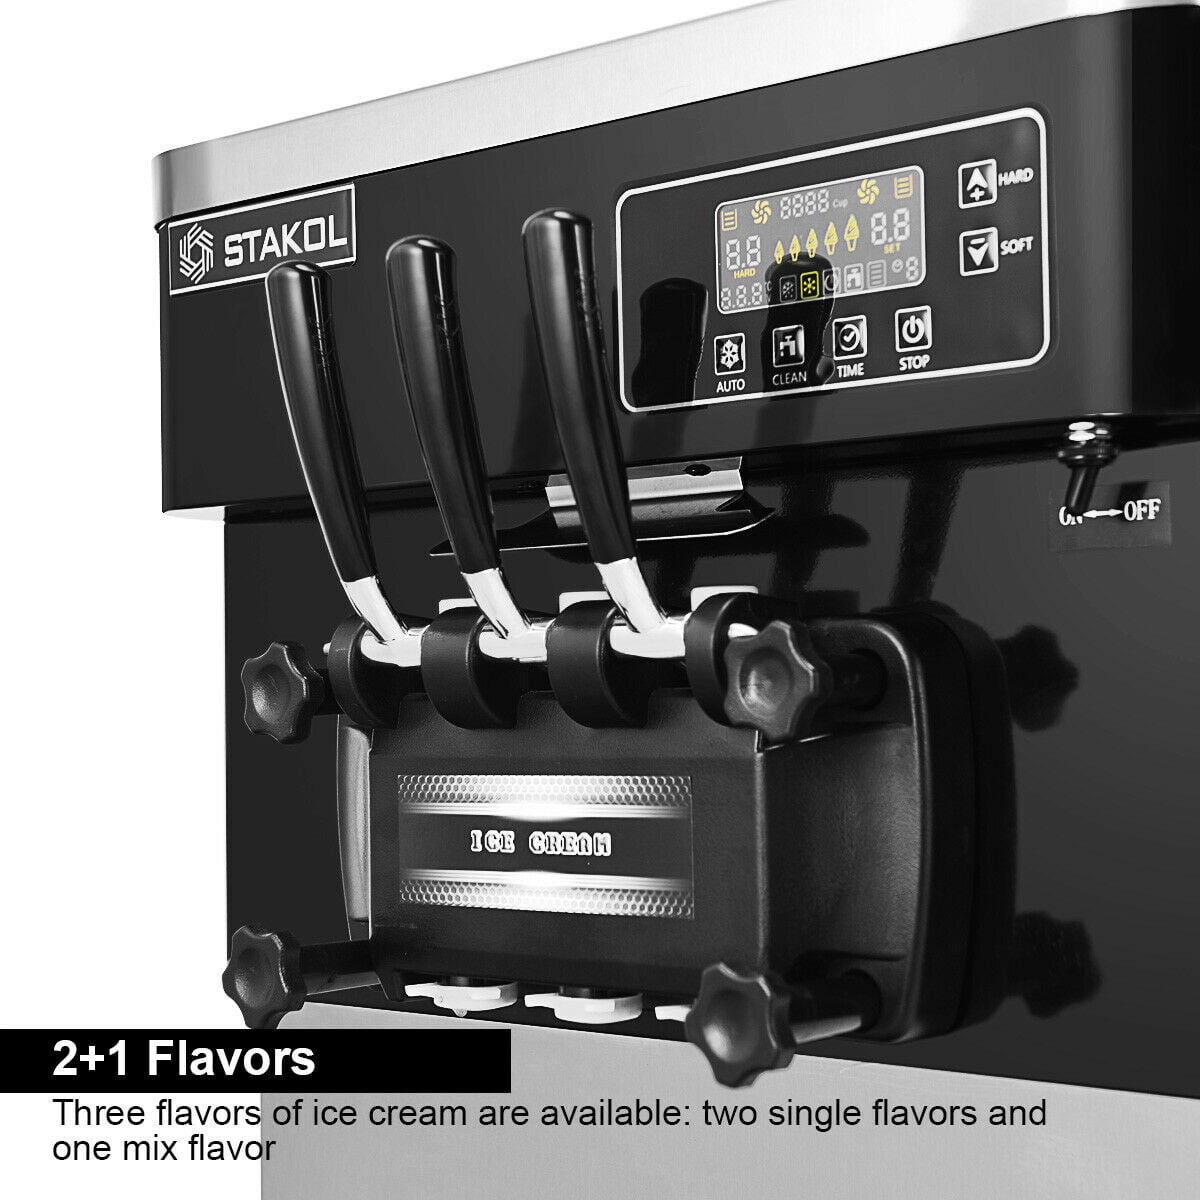 COSTWAY Commercial Ice Cream Machine Automatic 2200W 20-28L/5.3-7.4Gallon Per Hour Soft & Hard Serve Ice Cream Maker with LCD Display Screen 3 Flavors Auto Shut-Off Timer Sliver+Black 